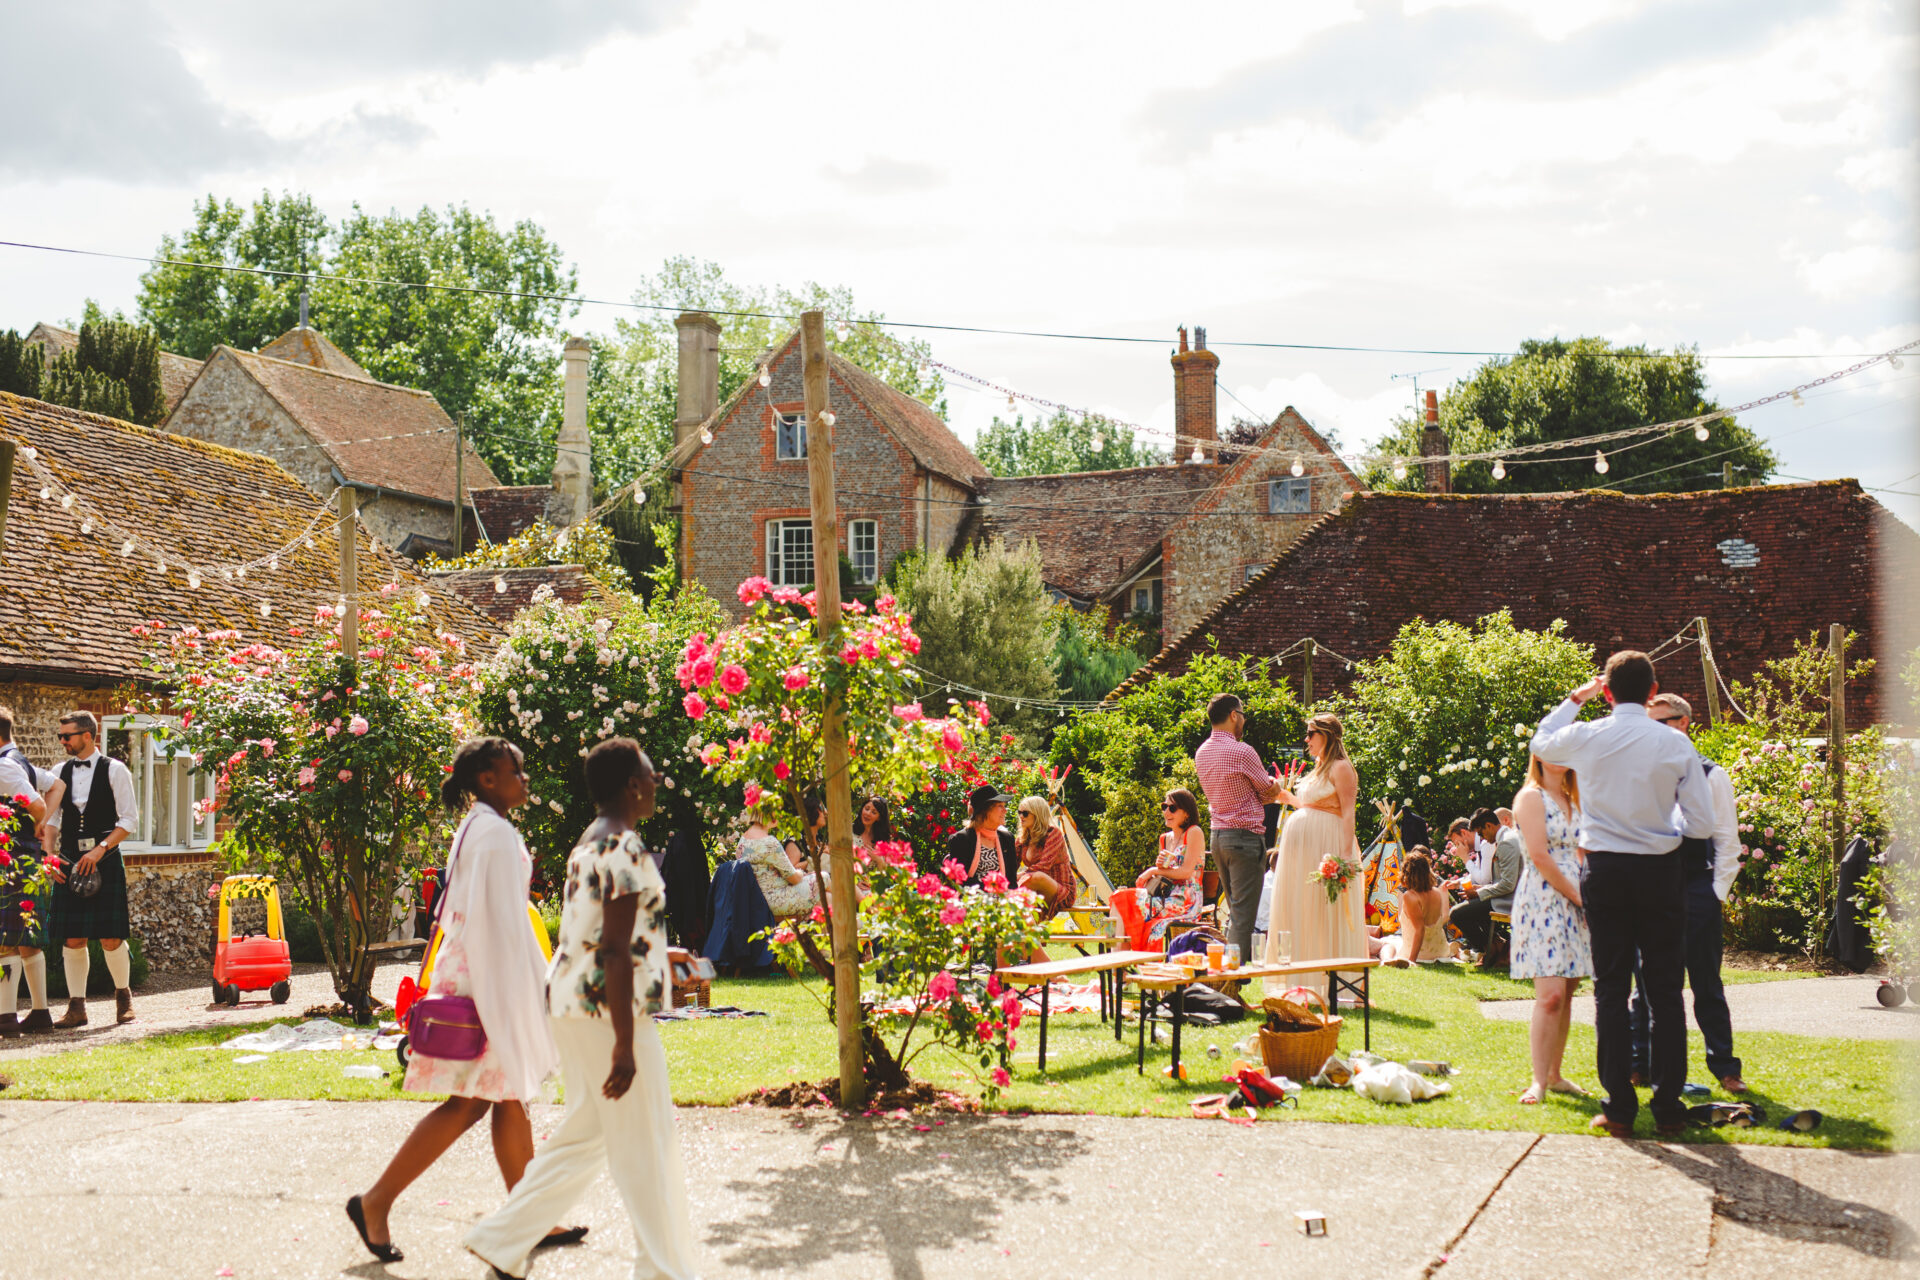 Friends and family guests at barn wedding with accommodation at Sullington Manor Farm, West Sussex, RH20 4AE. Farm wedding in South Downs.